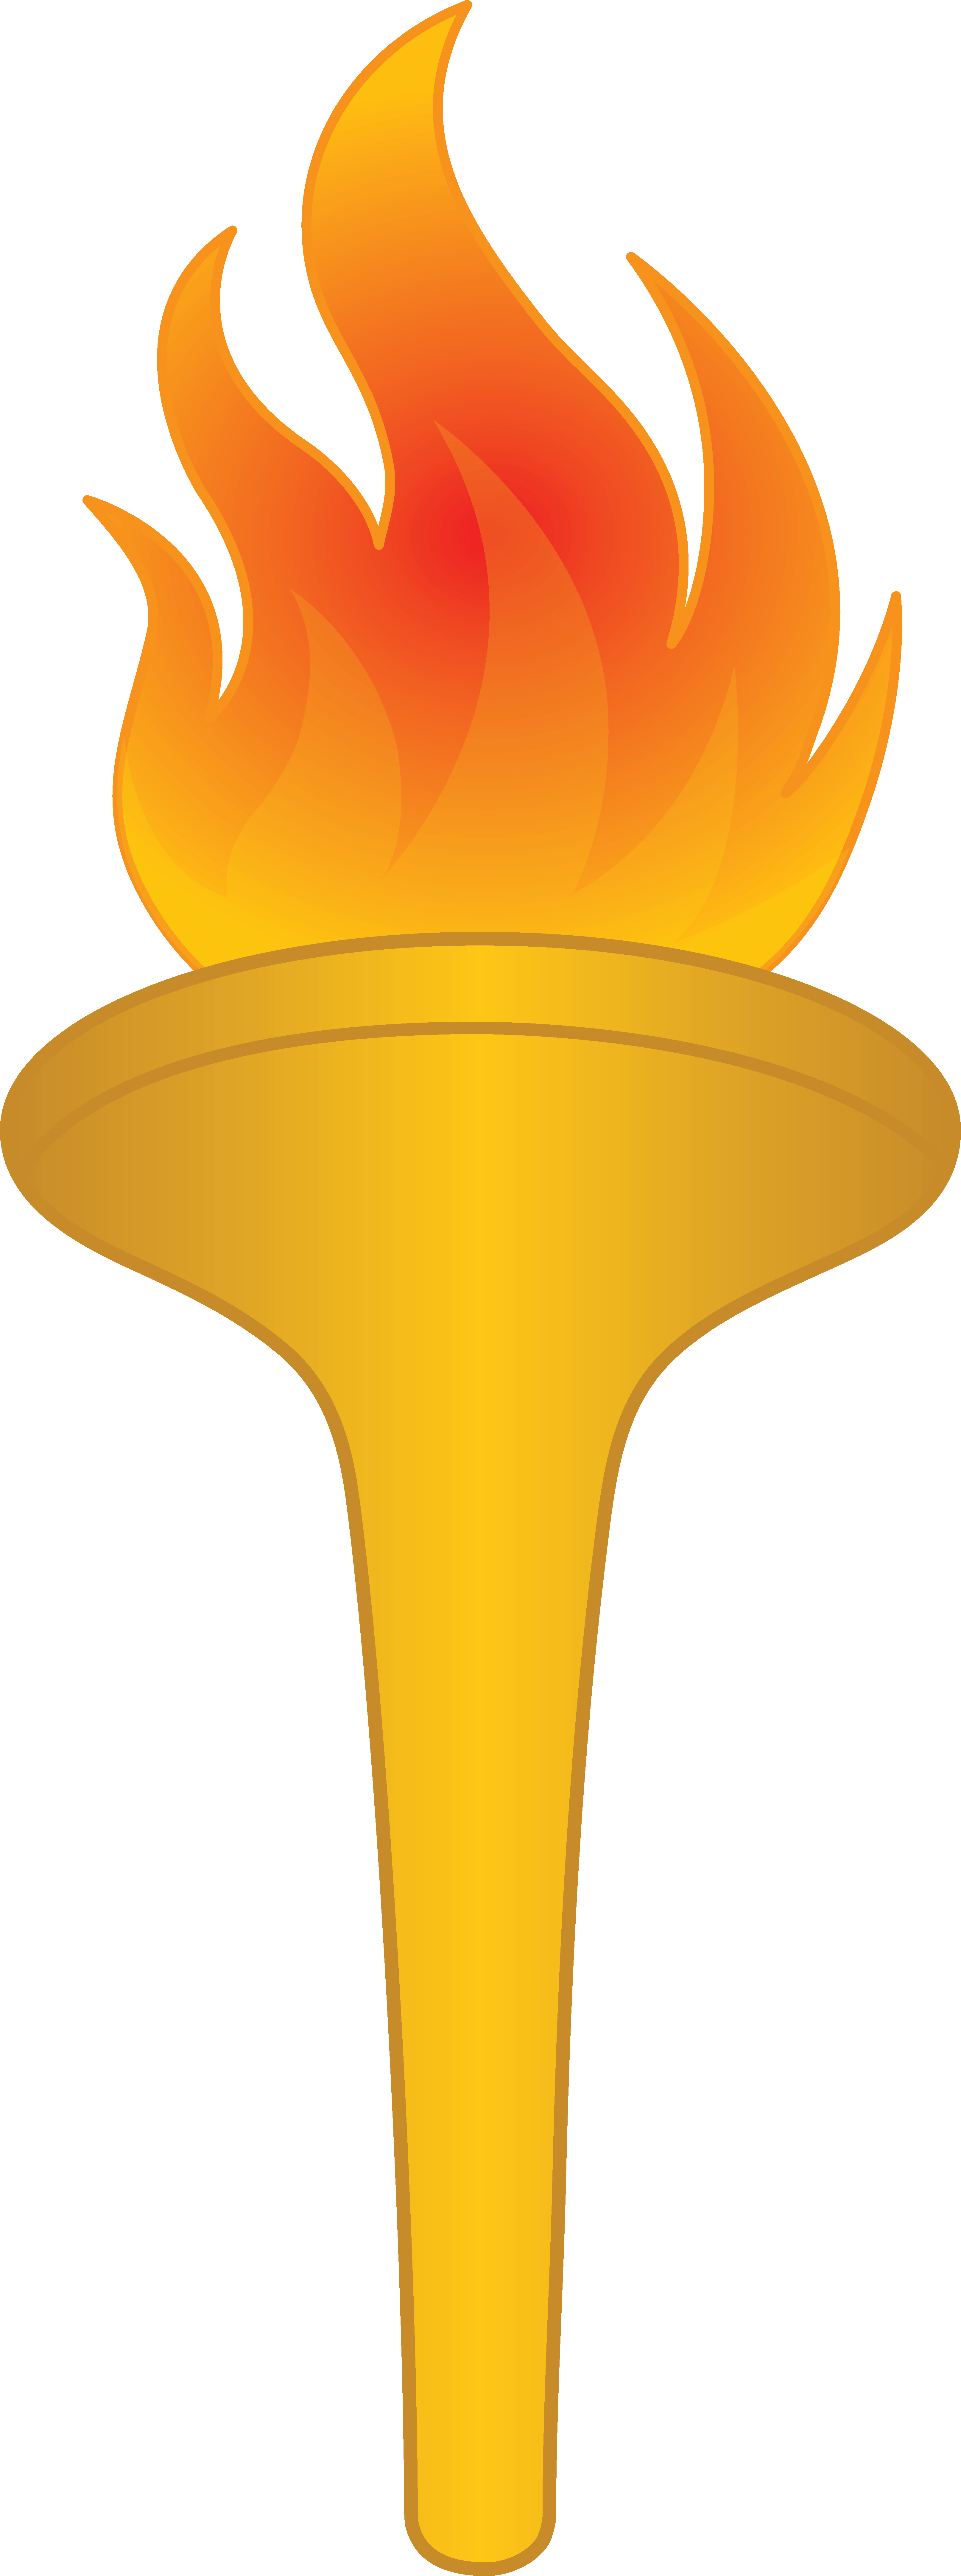 Torch . Olympic clipart tourch